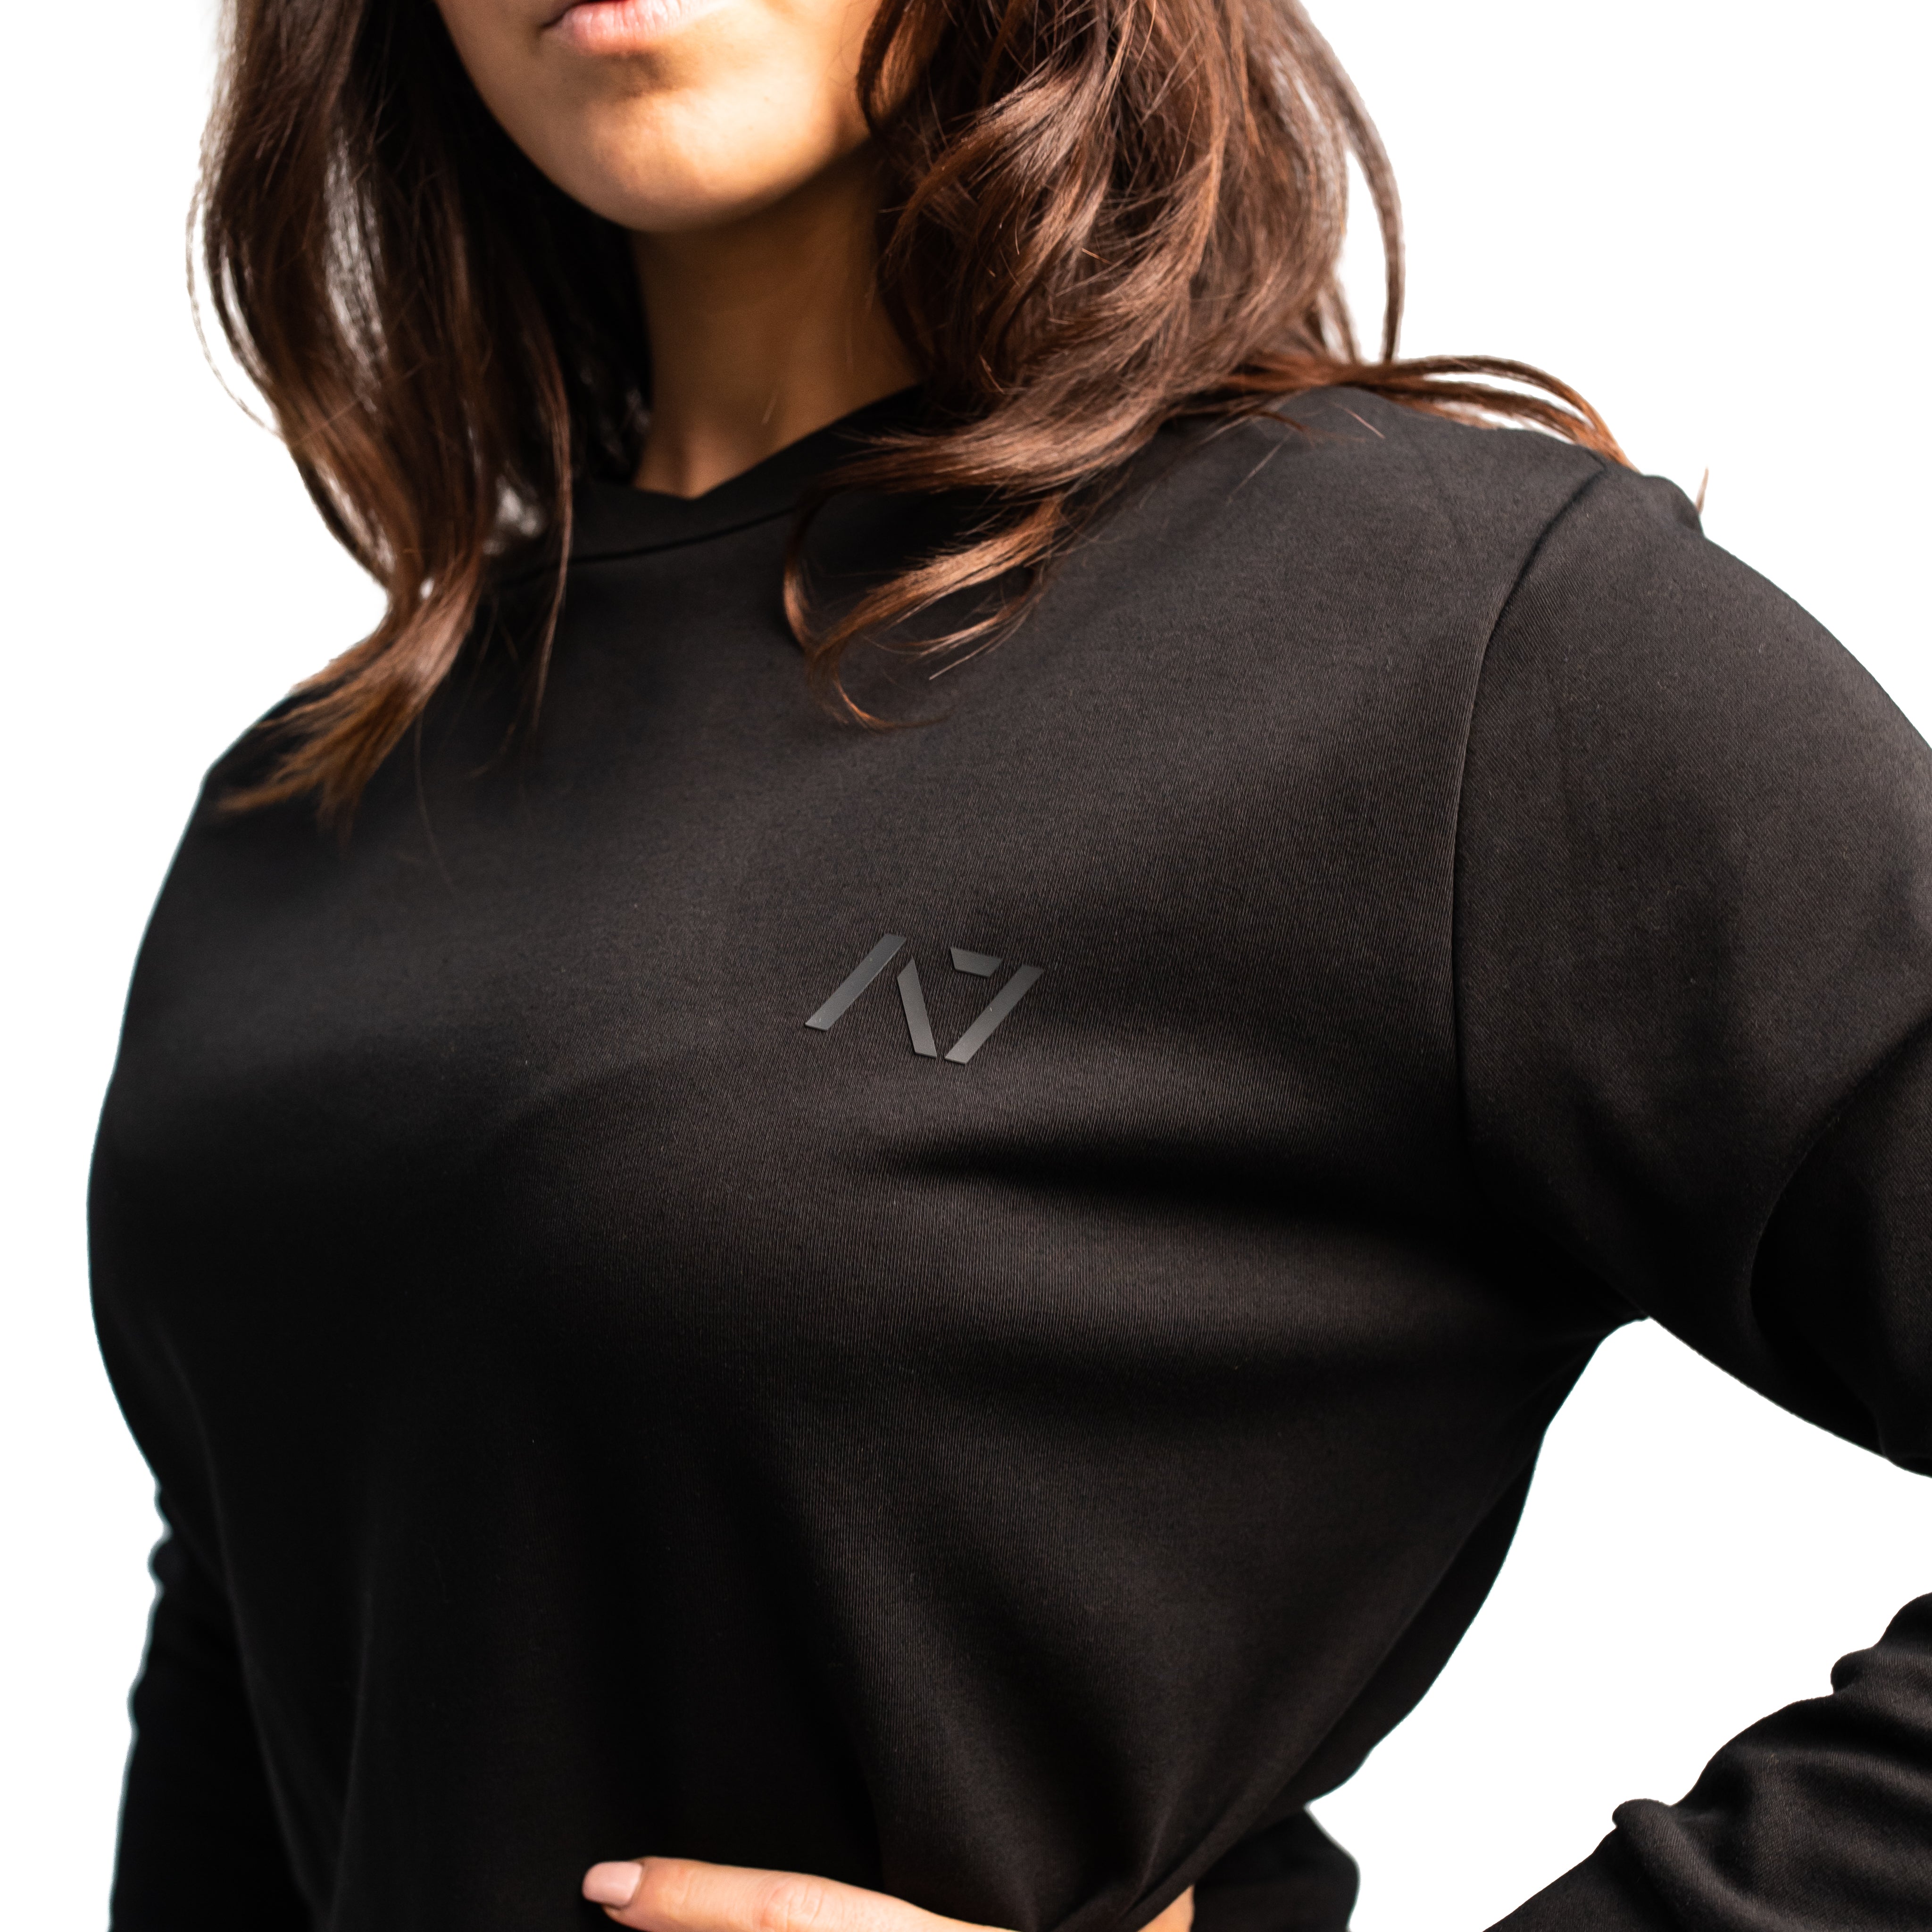 A7 Moxie Crewnecks are part of the A7 balance collection which combines comfort and aesthetics. The pieces in this collection are made with comfortable fabrics and minimal logos to create a simple, yet impactful look. Moxie Crewnecks have 4-way stretch material to move with your shape. A7 crewneck perfect for in and out the gym. Purchase A7 Moxie Creckneck from A7 Europe. Purchase A7 Moxie Crewneck from A7 UK. Available in UK and Europe including France, Italy, Germany, the Netherlands, Sweden and Poland.